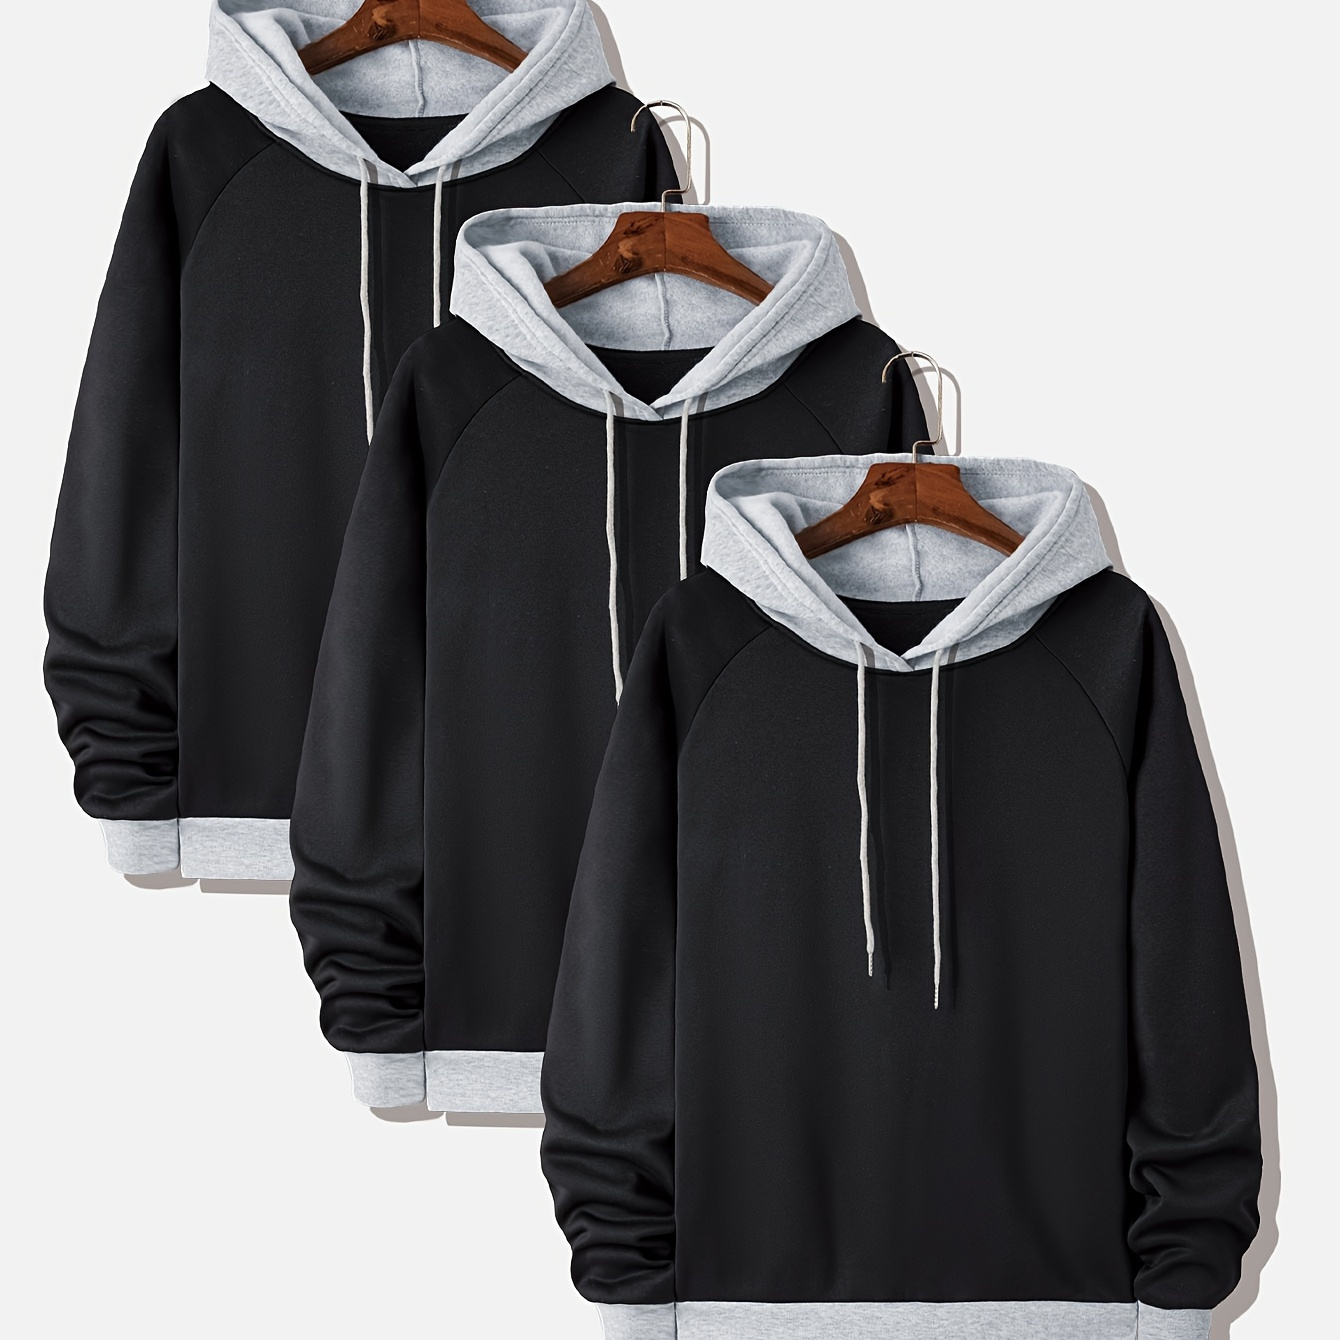 

3pcs Plus Size Men's Contrast Color Hooded Sweatshirt Oversized Hoodies Fashion Casual Tops For Spring/autumn, Men's Clothing